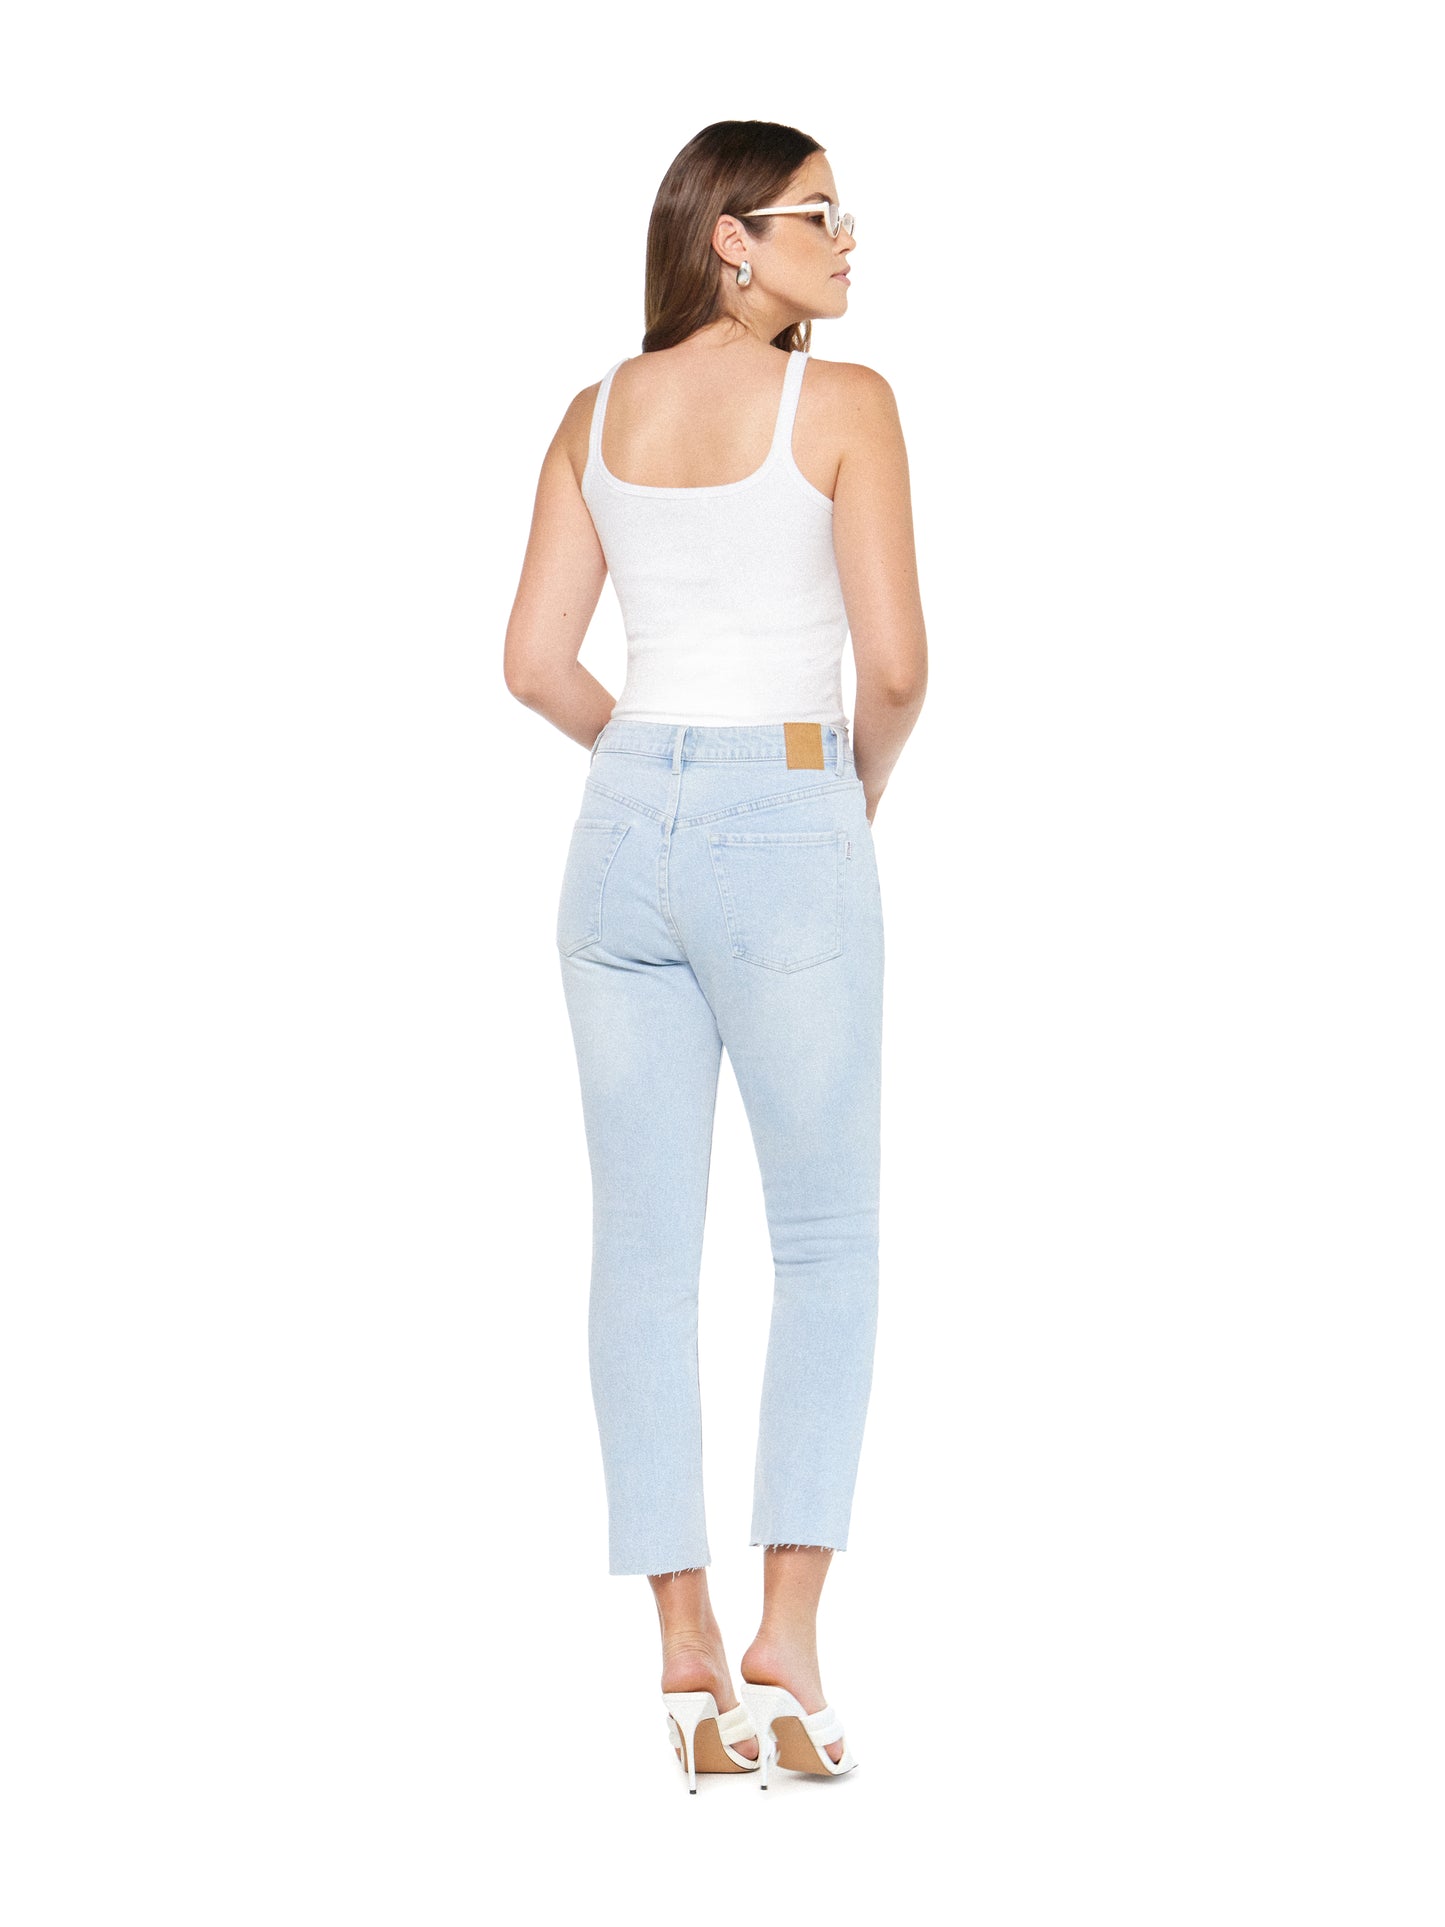 Articles of Society Jones Cropped Cloud Blue Mid Rise Slim